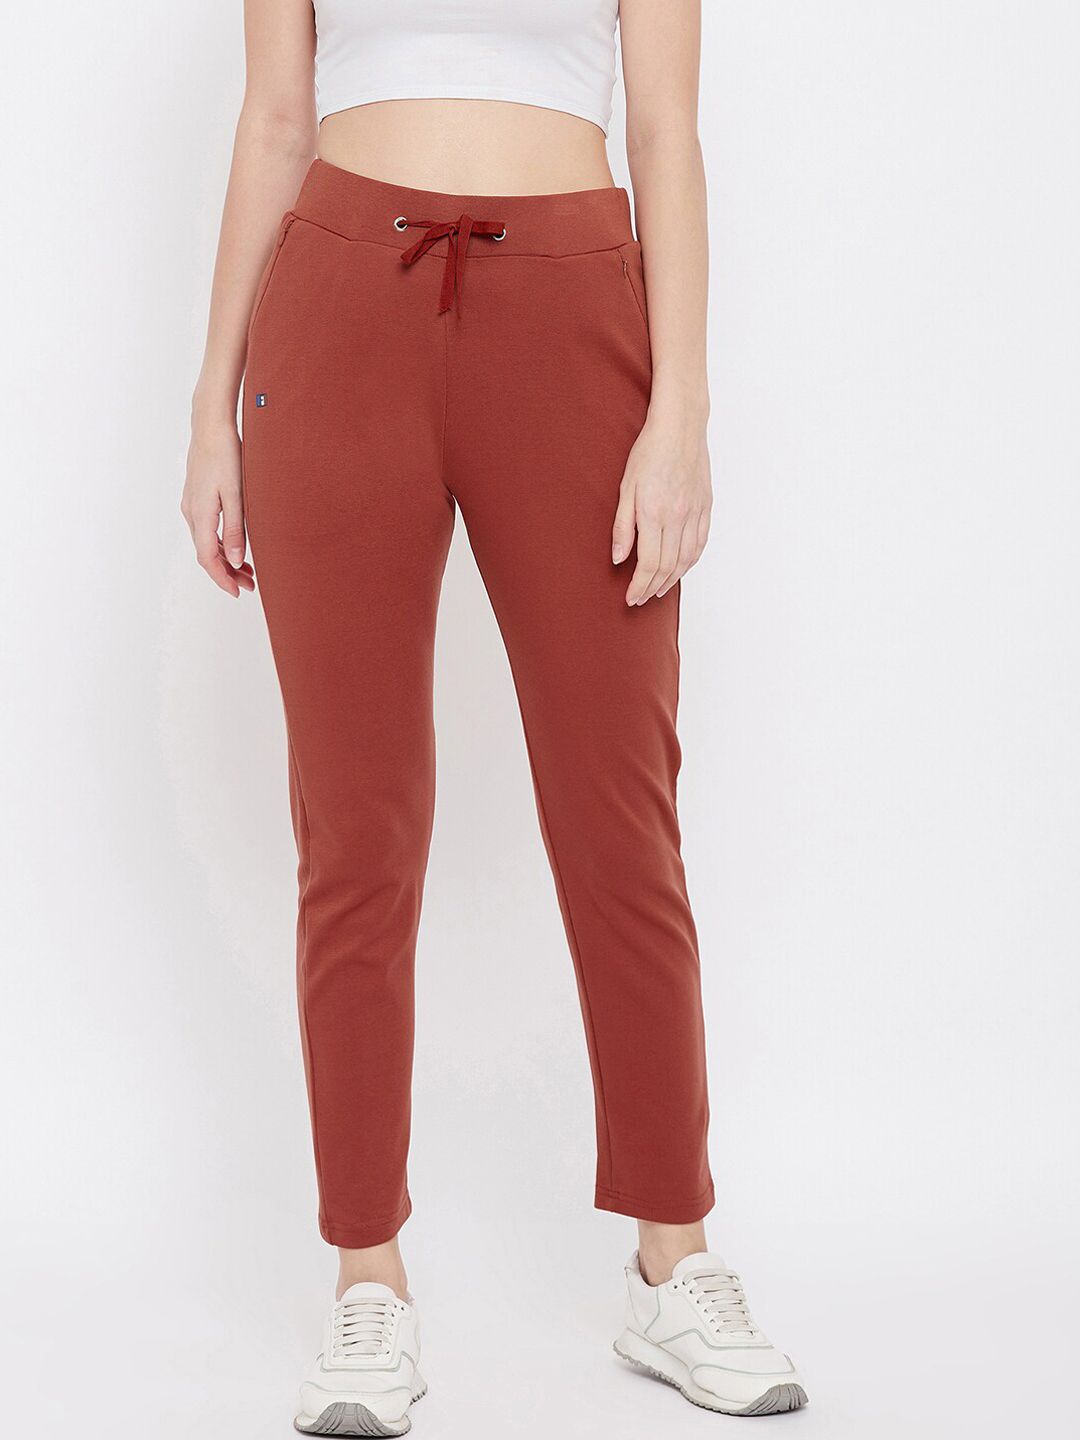 FRENCH FLEXIOUS Women Rust-Brown Slim-Fit Track Pants Price in India